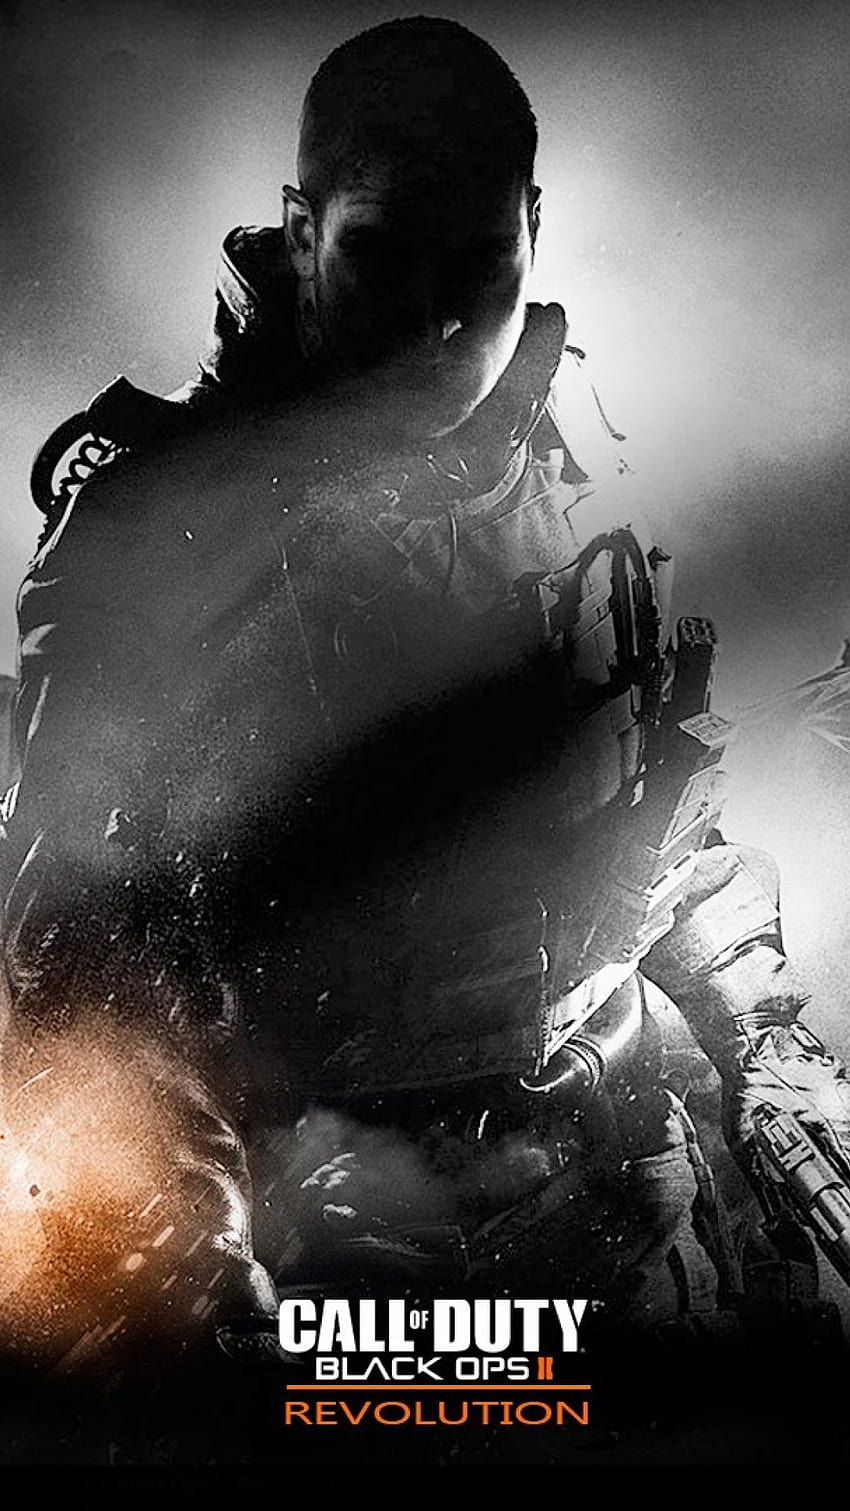 Best 4 Black Ops 2 Backgrounds on Hip, call of duty mobile poster 1920p HD  phone wallpaper | Pxfuel